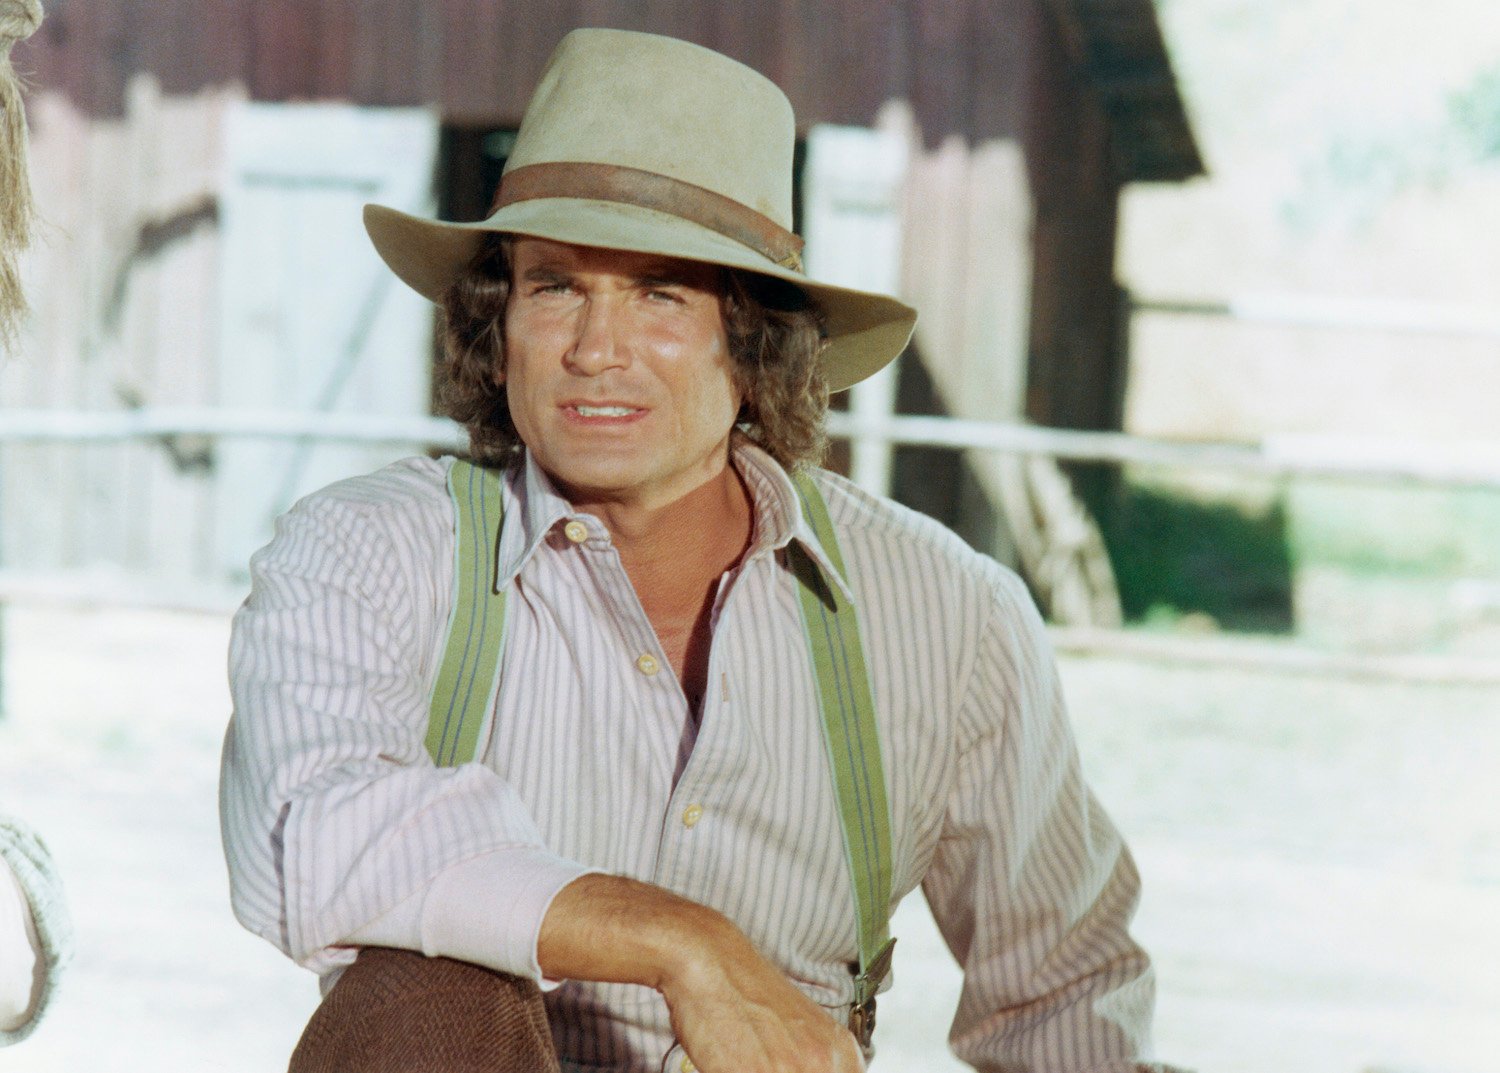 Michael Landon as Charles Philip Ingalls on 'Little House on the Prairie'